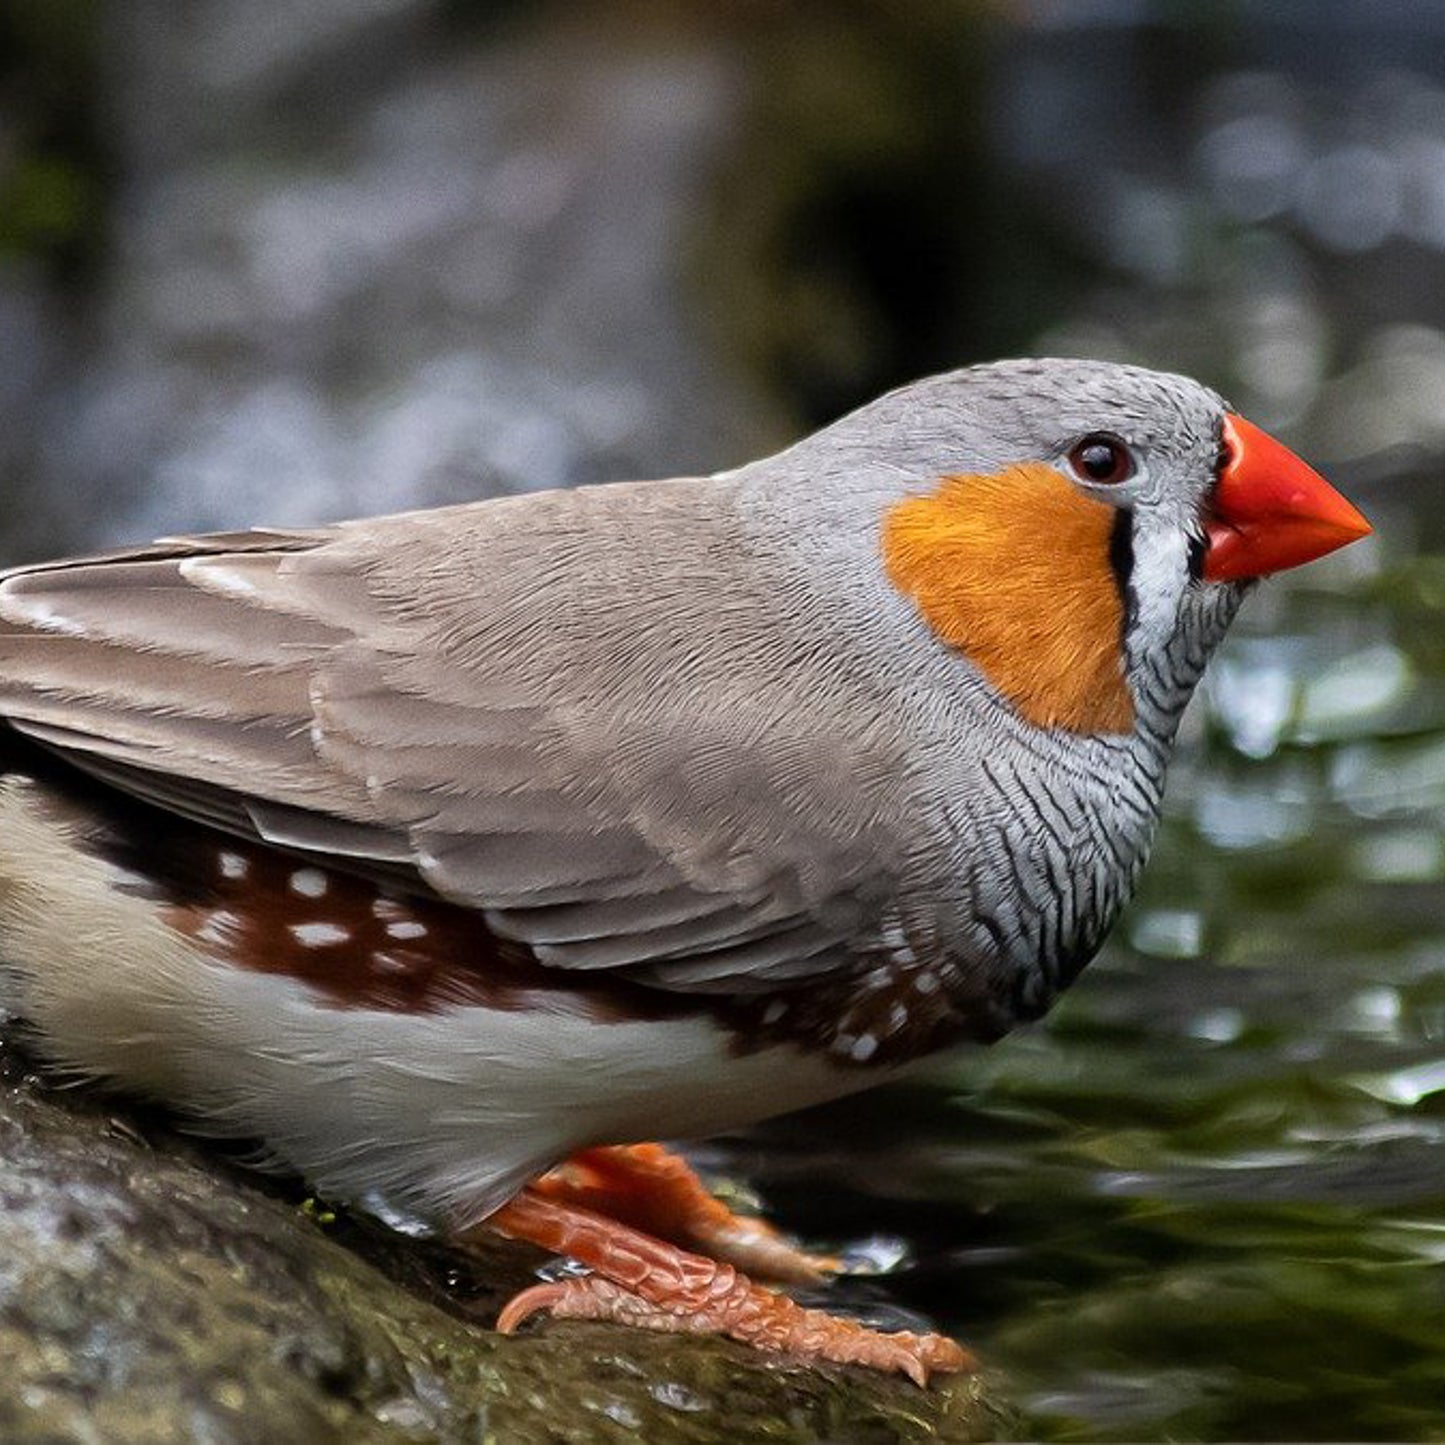 Zebra Finch - Bluefaced Leicester